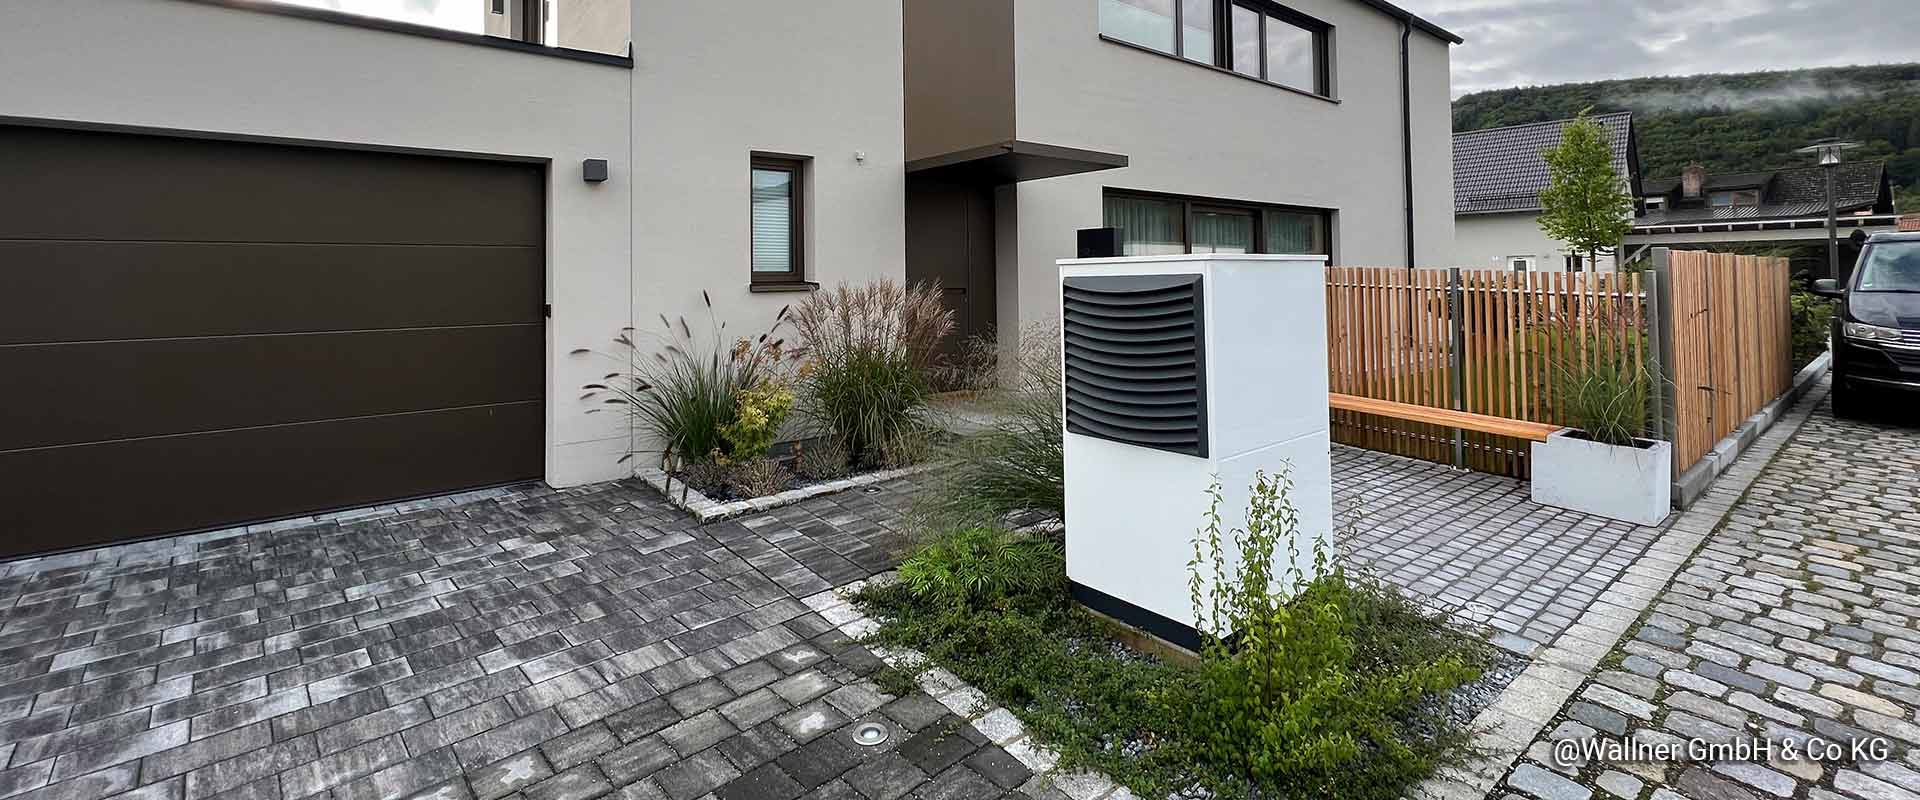 An air source heat pump can be seen installed on some decorative gravel and surrounded by some small plants. A paved way around the heat pump leads to the new building in the background. On the right, there is a fence with some meadow behind.